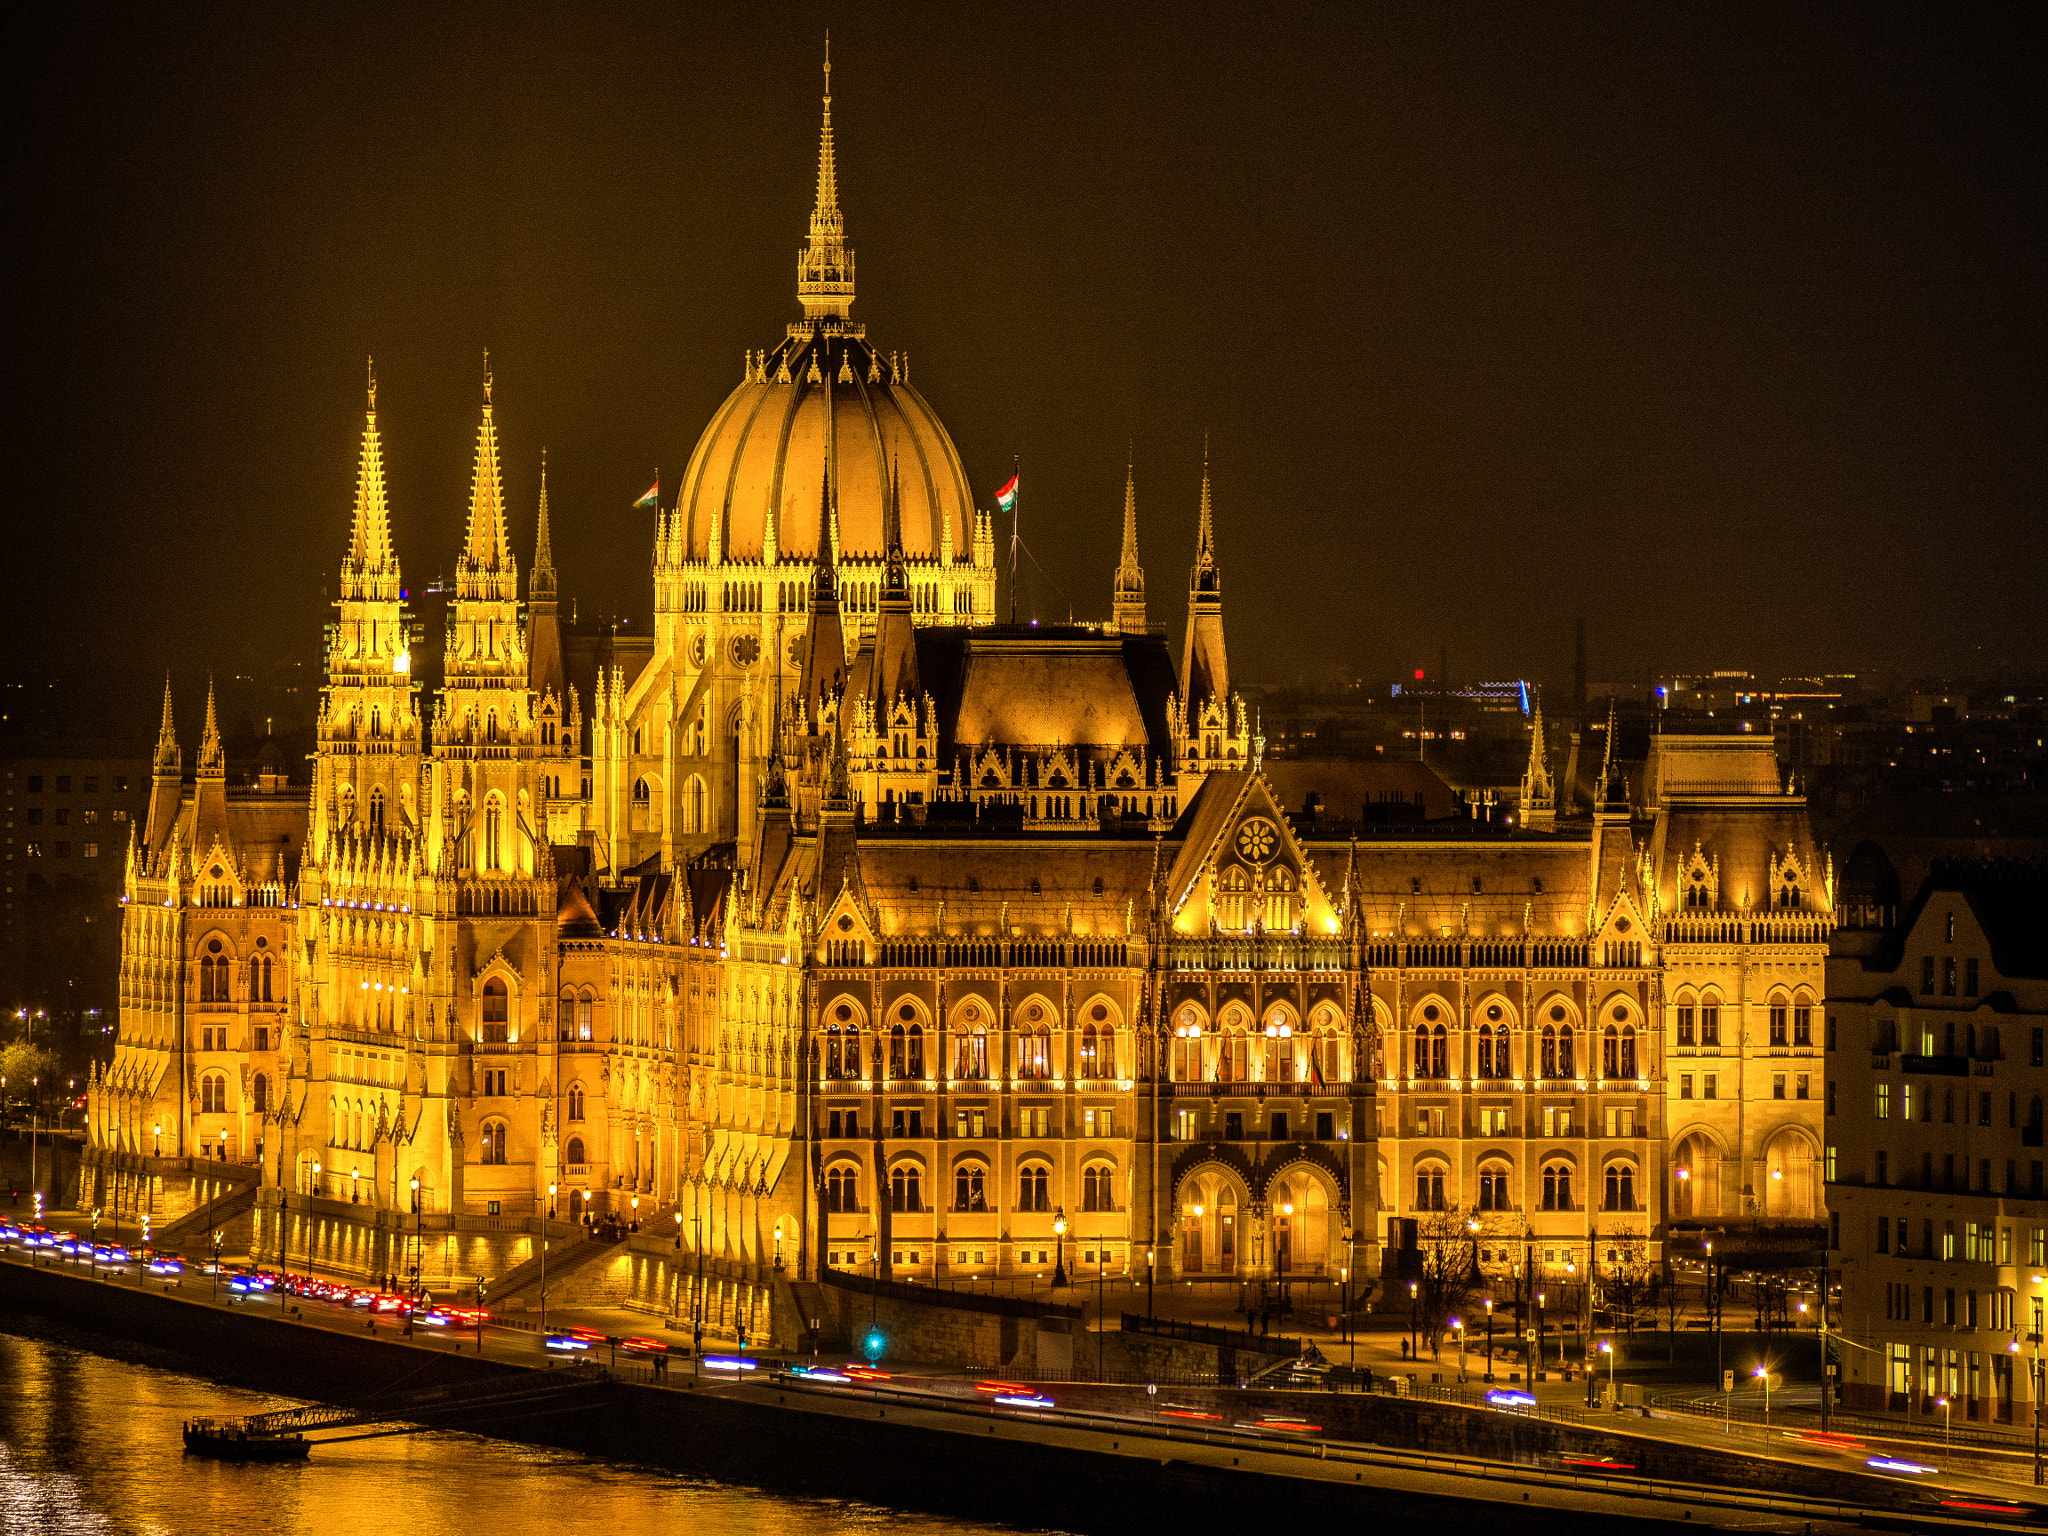 Olympus PEN E-PM2 sample photo. The hungarian parliament building in budapest photography